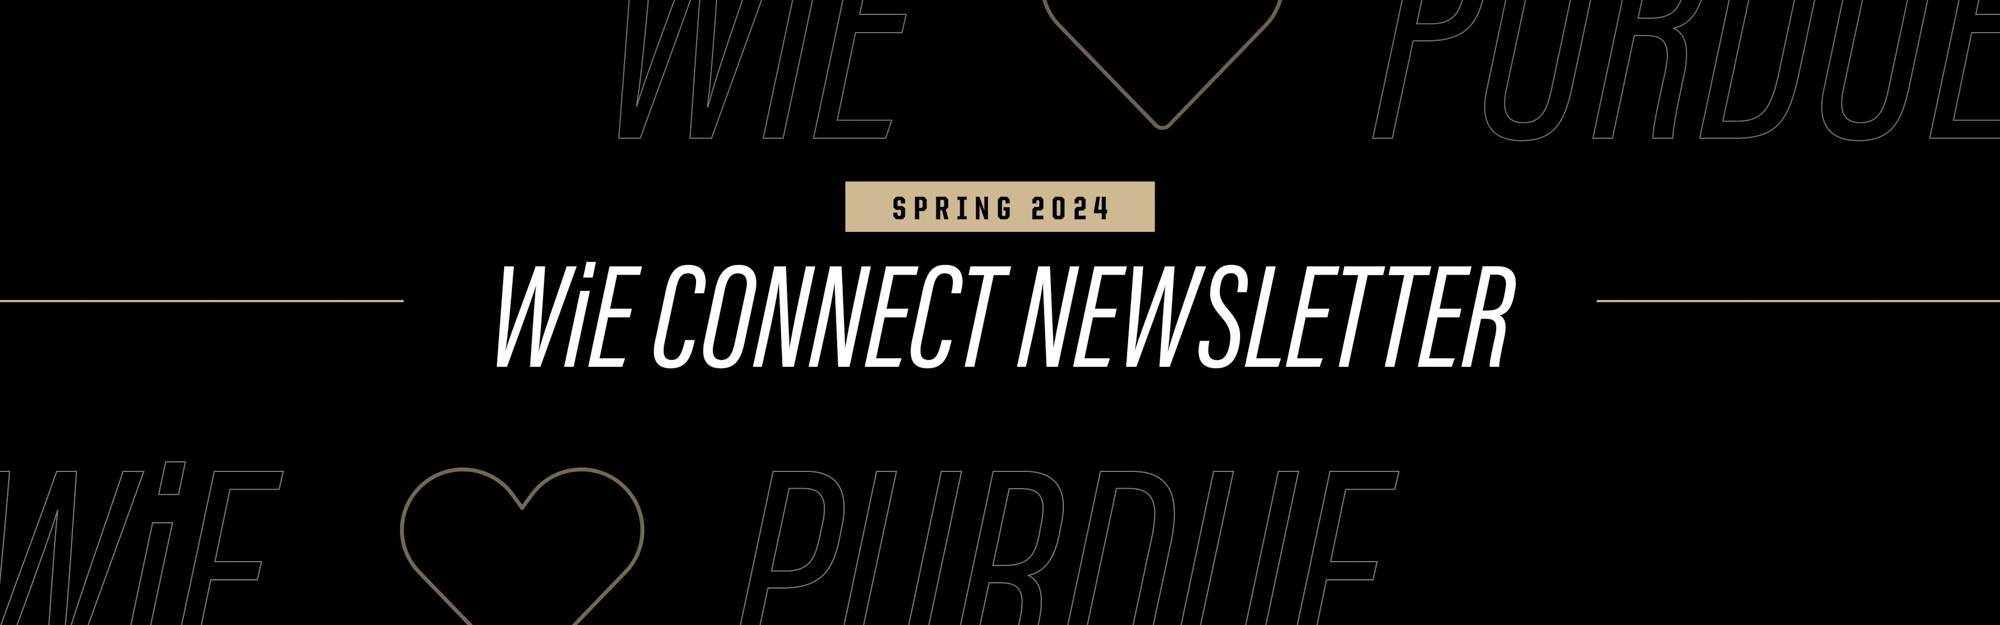 Spring 2024 WiE Connect Newsletter graphic